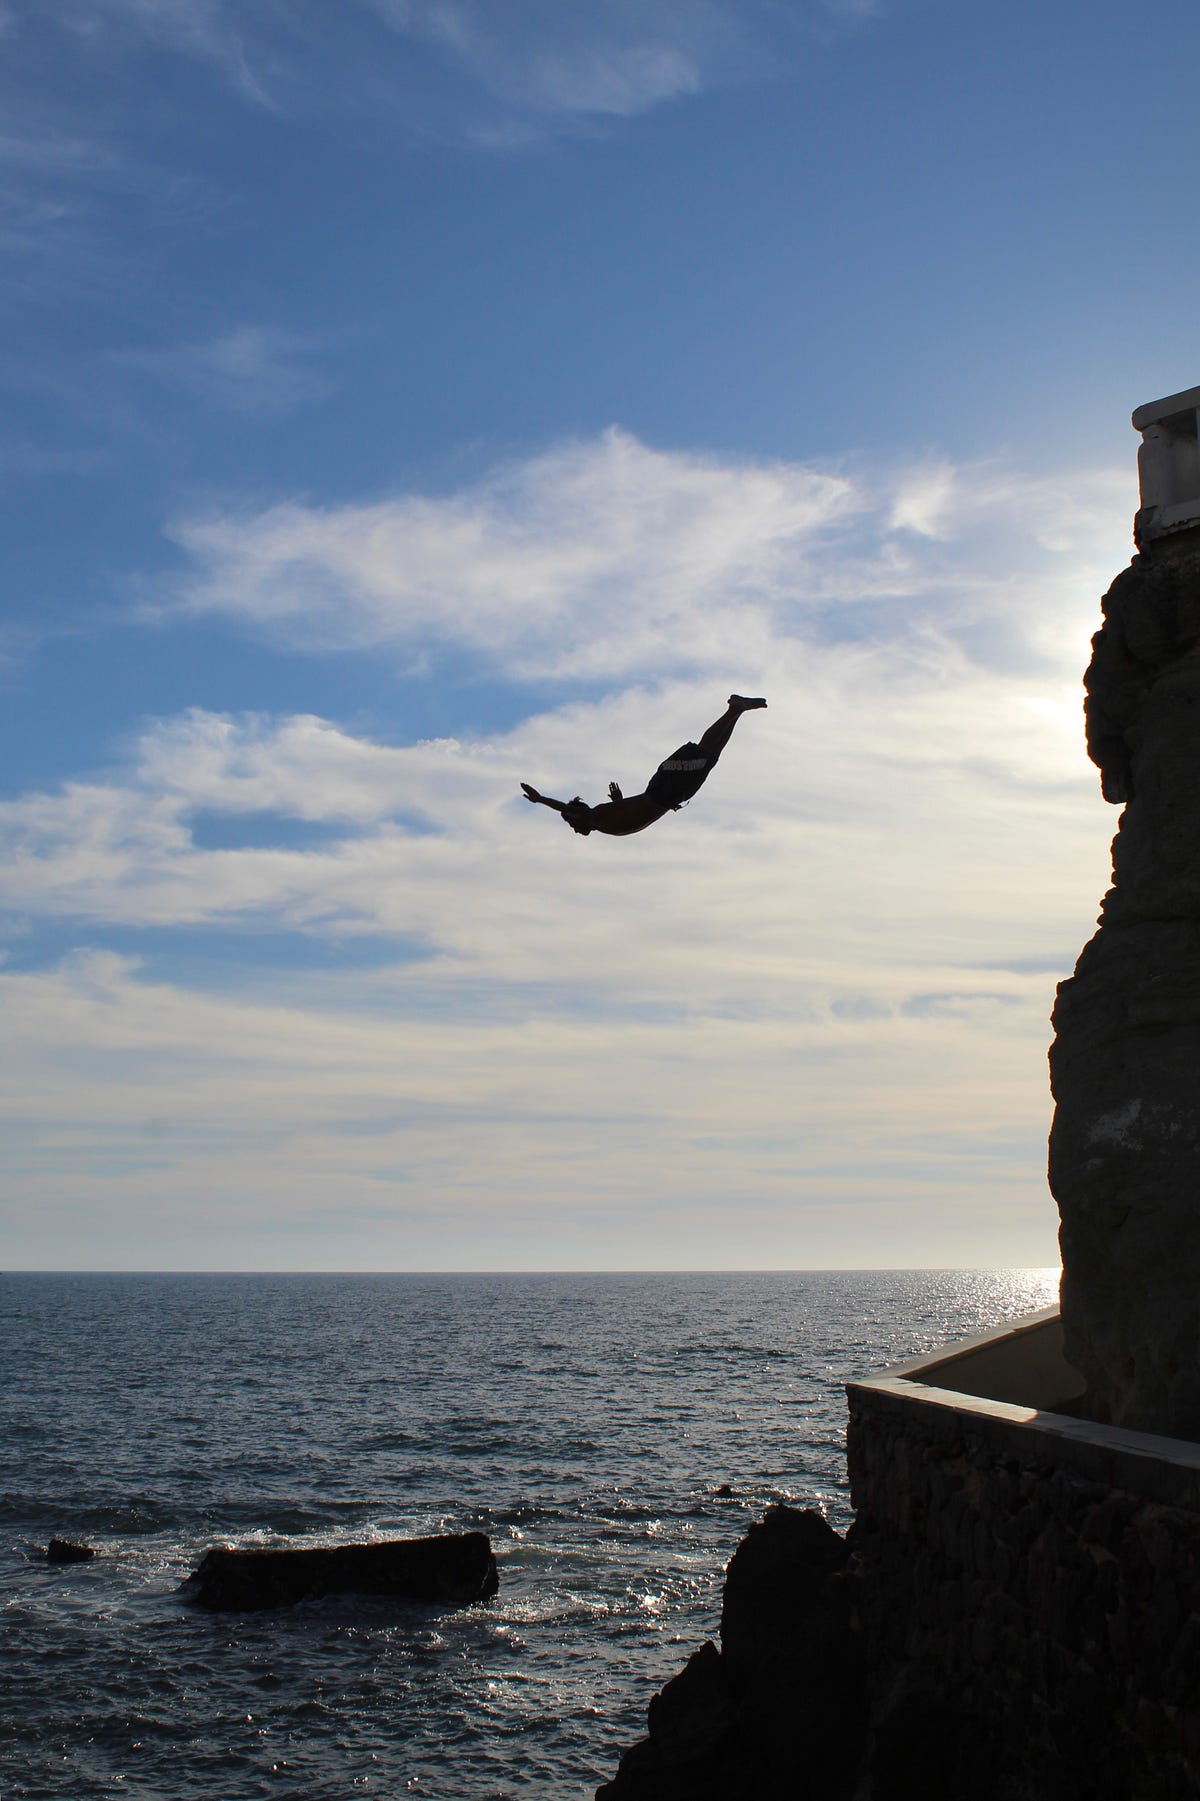 From Cliff Divers to a Nudist Beach | by J. Sharland Day | Medium